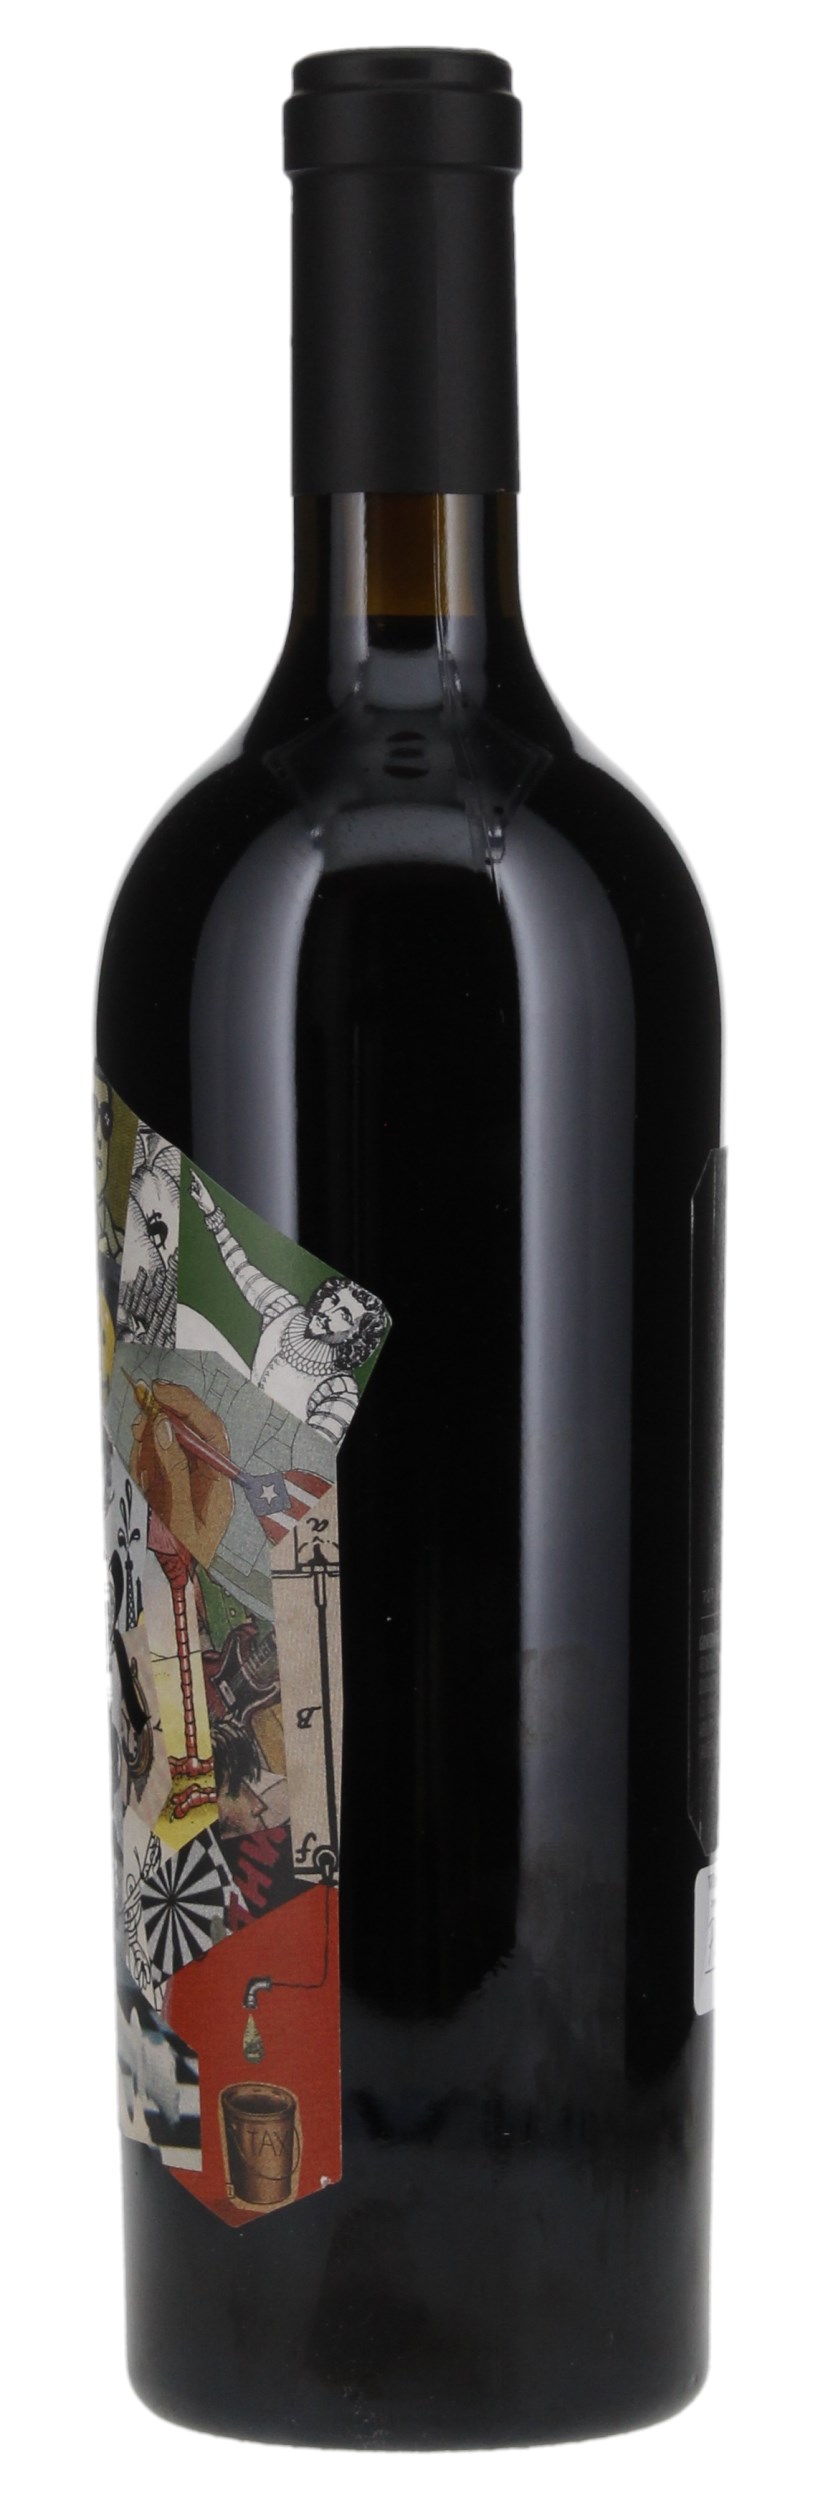 2012 Realm The Absurd, 750ml